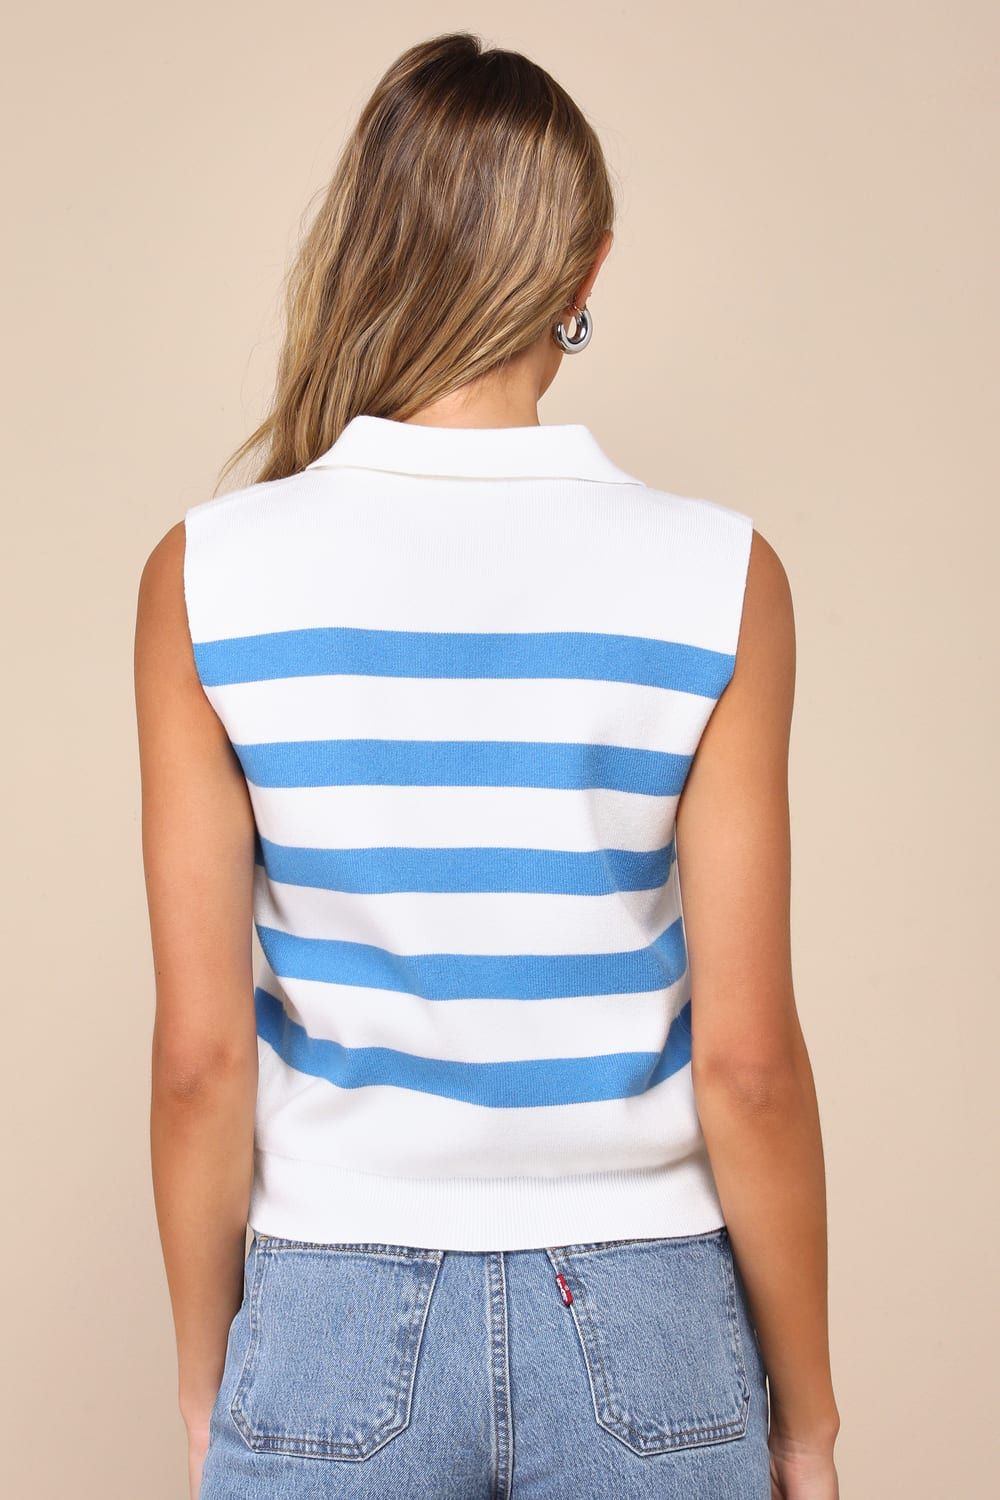 Unbelievably Chic White Striped Collared Sleeveless Sweater Top | Lulus